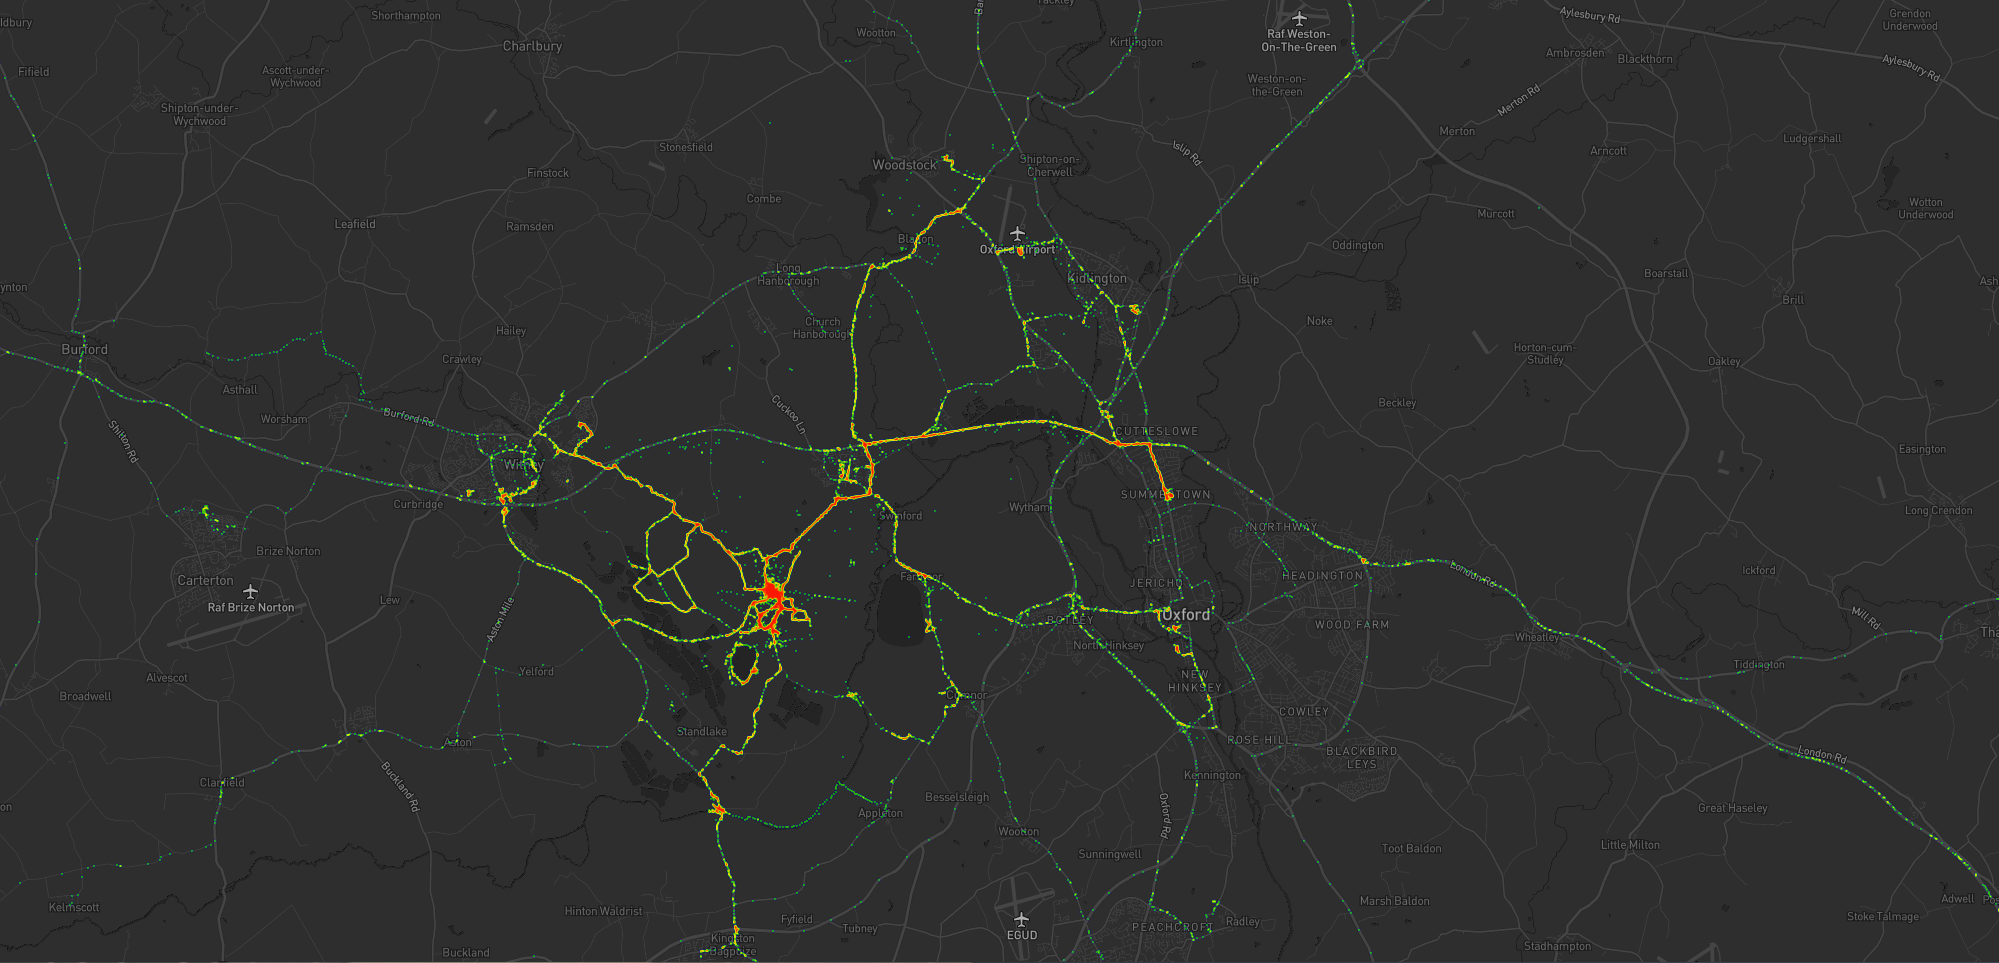 Heatmap showing Dan's movements around Oxford since moving house in 2020. There's a strong cluster around Stanton Harcourt with heavy tendrils around Witney and Eynsham and along the A40 to Summertown, and lighter tendrils around North and Central Oxford.